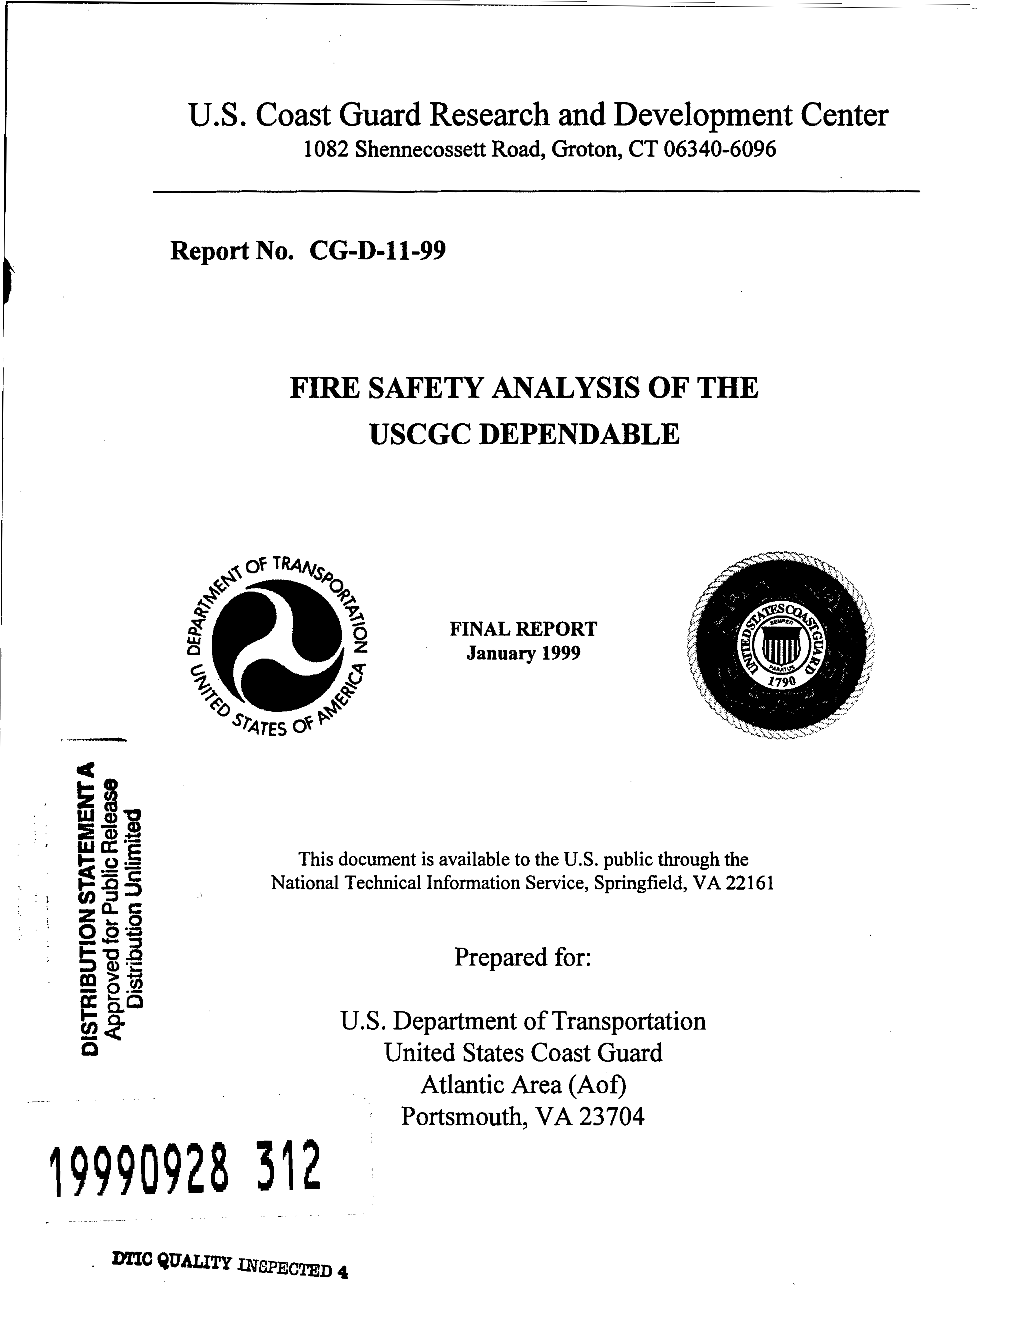 Fire Safety Analysis of the Uscgc Dependable